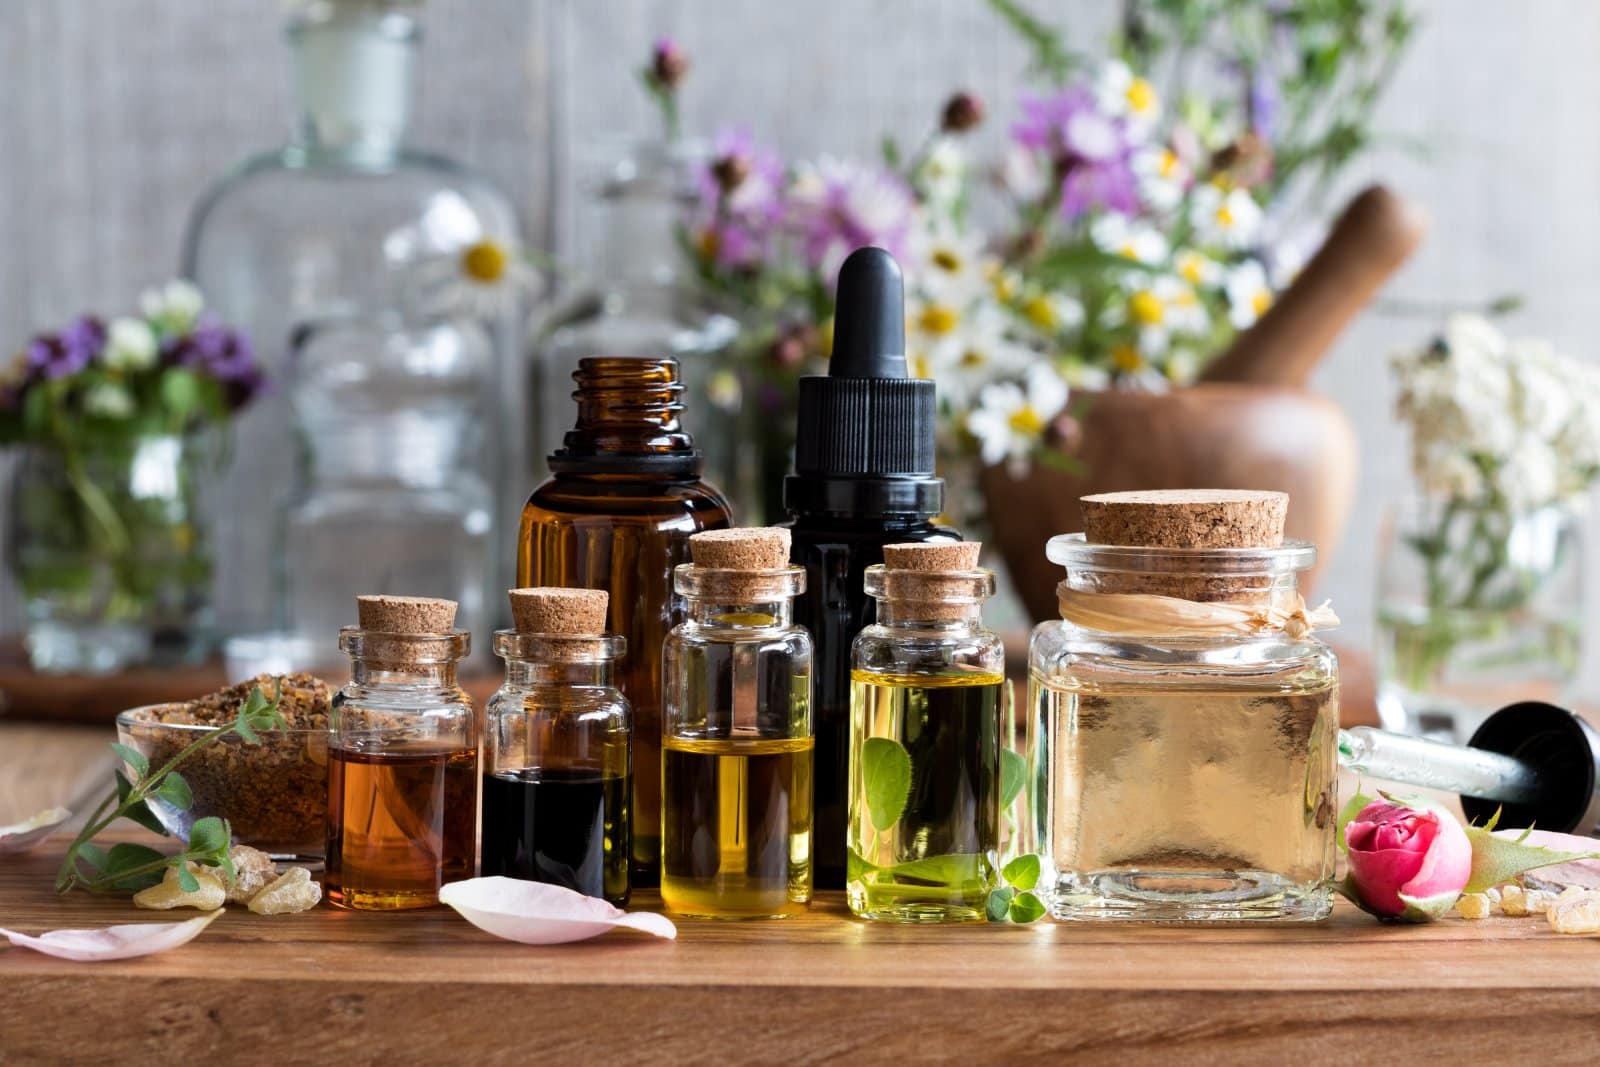 <p class="wp-caption-text">Image Credit: Shutterstock / Madeleine Steinbach</p>  <p><span>The use of herbal medicines and therapeutic oils is a hallmark of Ayurvedic treatment, with each selection made based on your specific health requirements and doshic balance. These natural remedies are integral to massages, baths, and other treatments, working synergistically to heal, rejuvenate, and restore balance within the body.</span></p> <p><span>Engaging with this aspect of your treatment plan offers an opportunity to learn about the healing power of nature and the benefits of incorporating herbal remedies into your wellness regimen.</span></p>